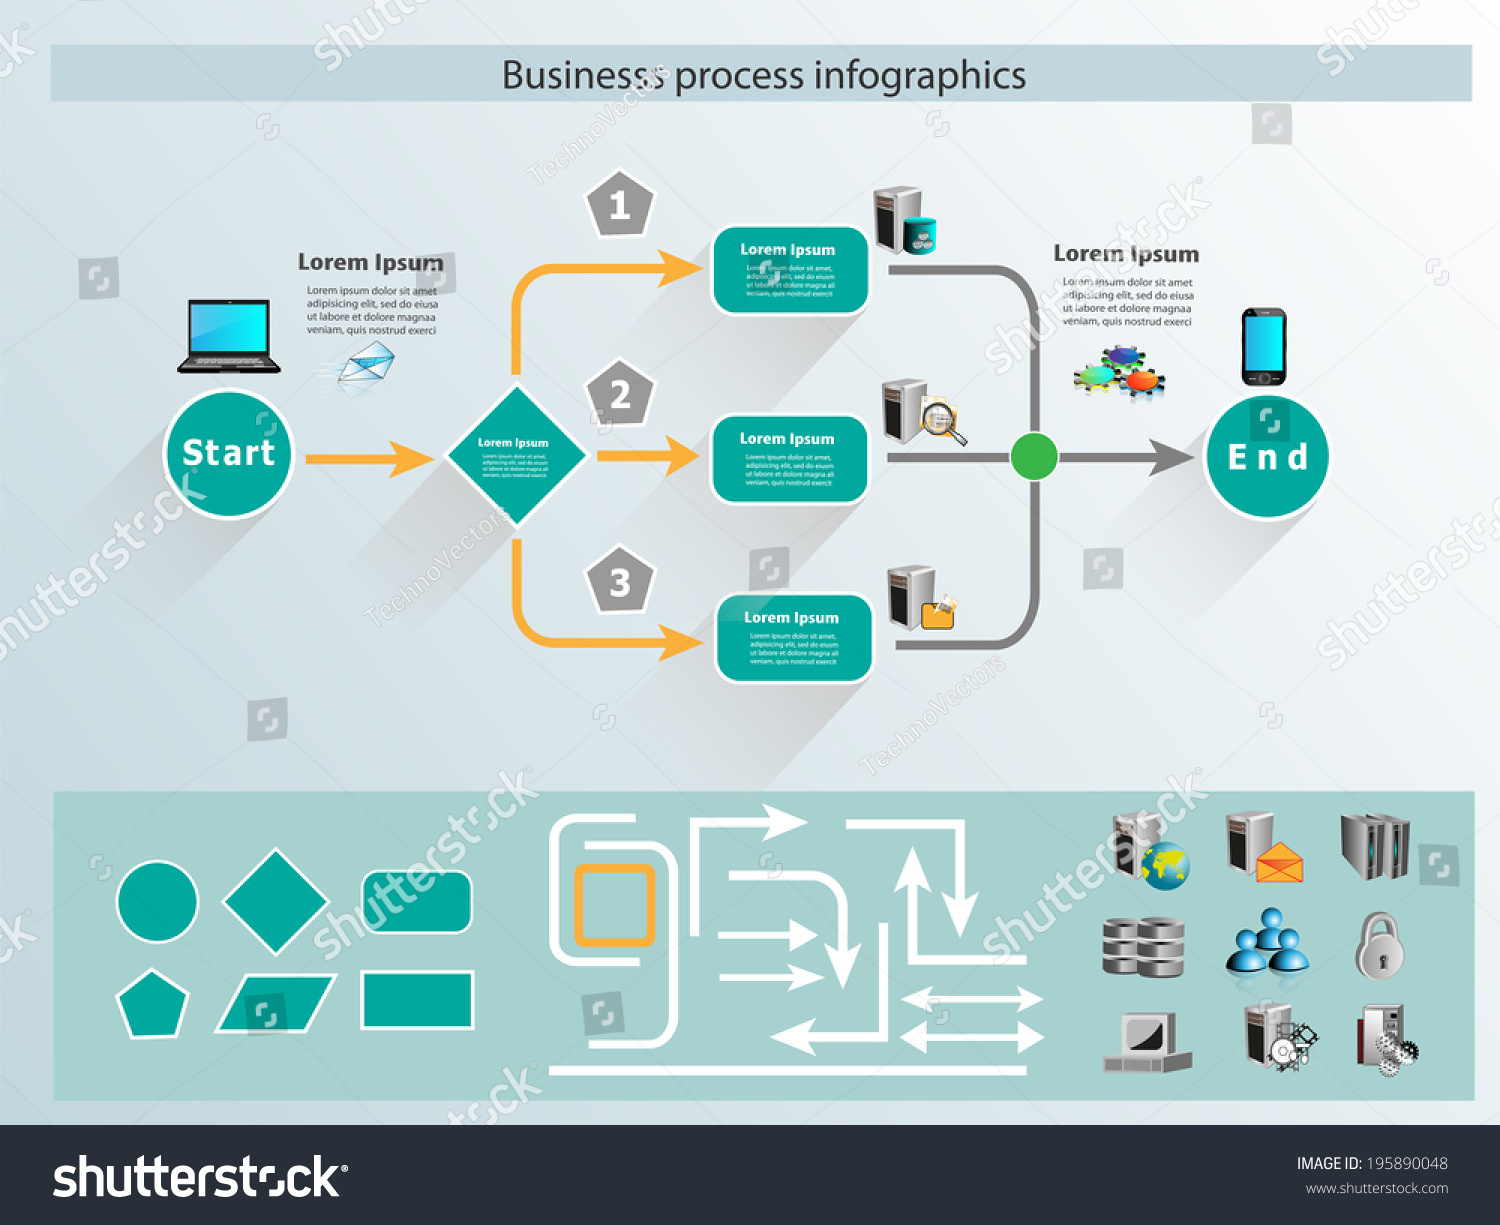 clipart for business process - photo #23